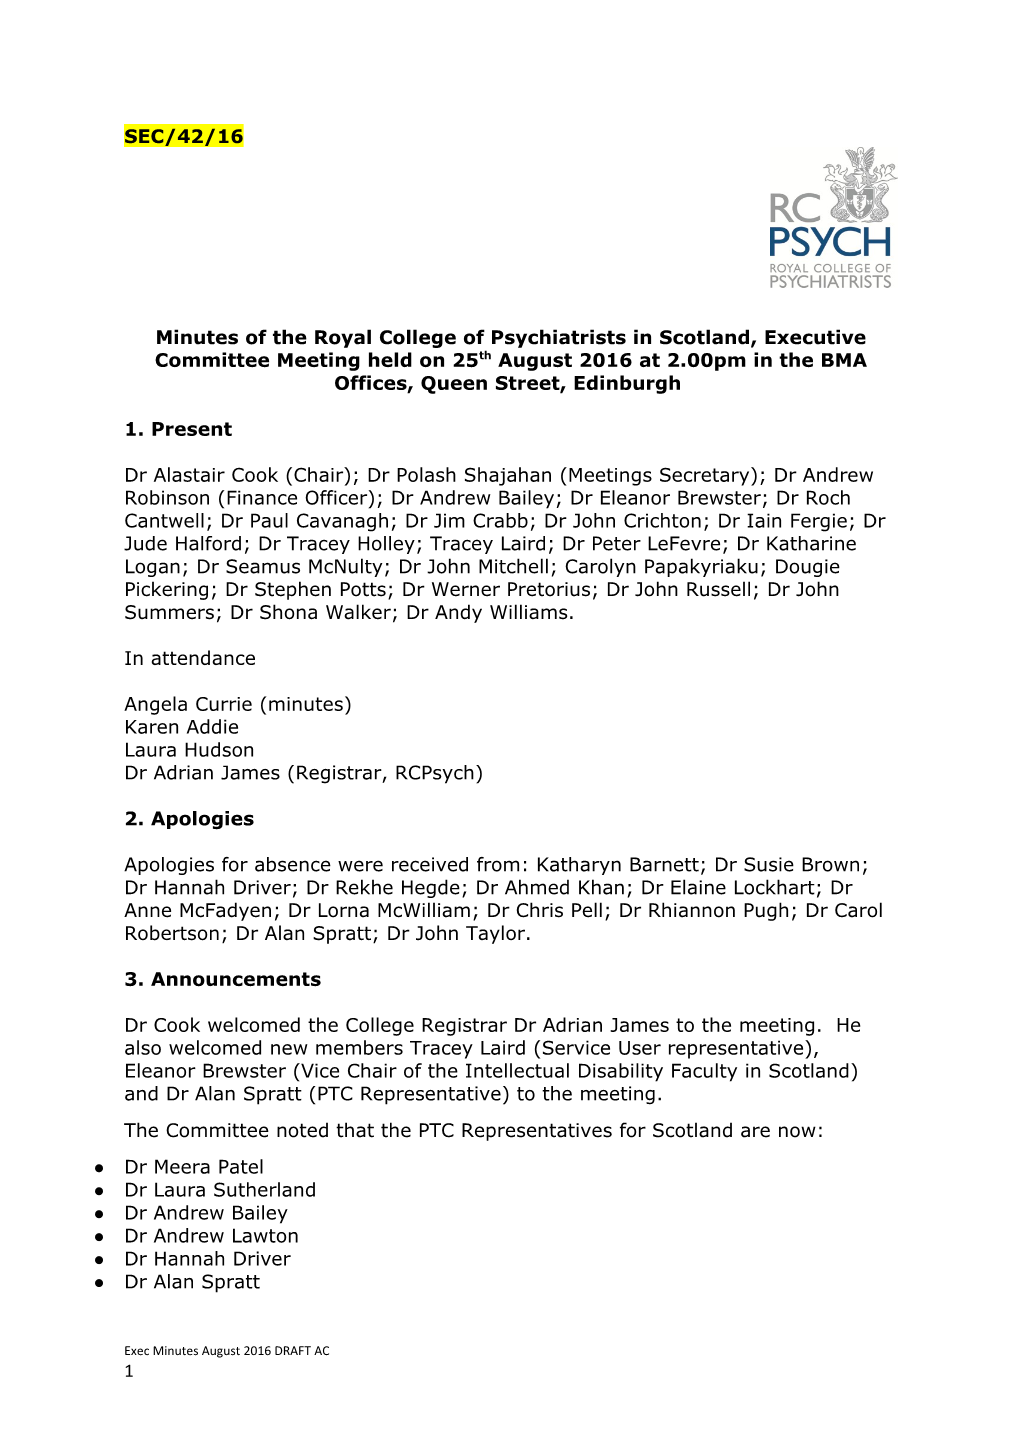 Minutes of the Royal College of Psychiatrists in Scotland, Executive Committee Meeting